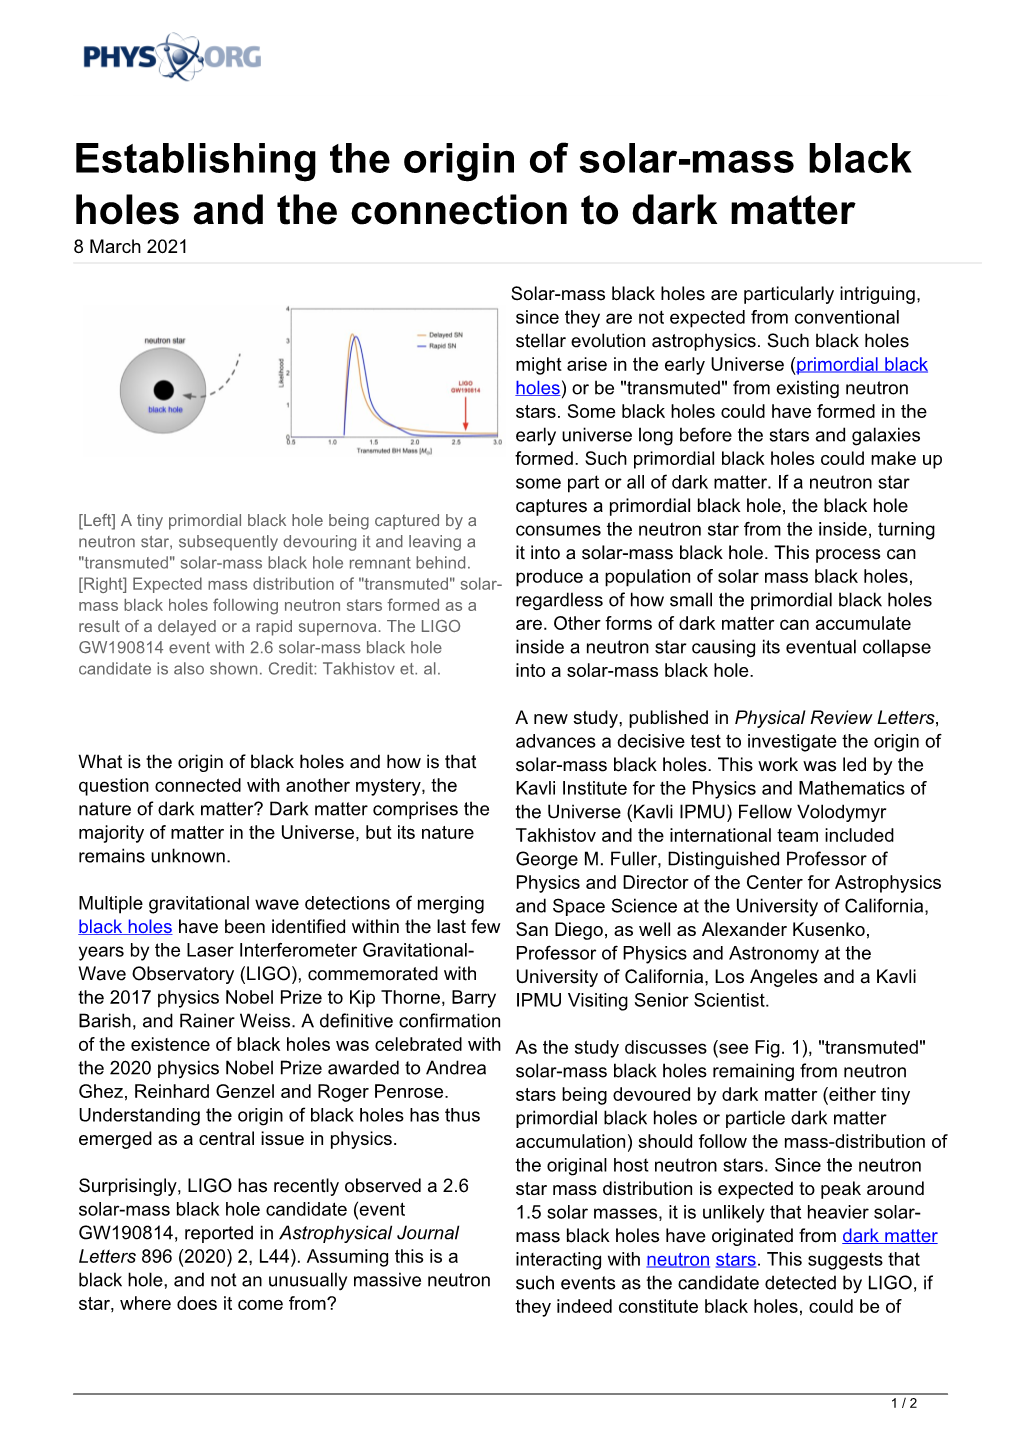 Establishing the Origin of Solar-Mass Black Holes and the Connection to Dark Matter 8 March 2021